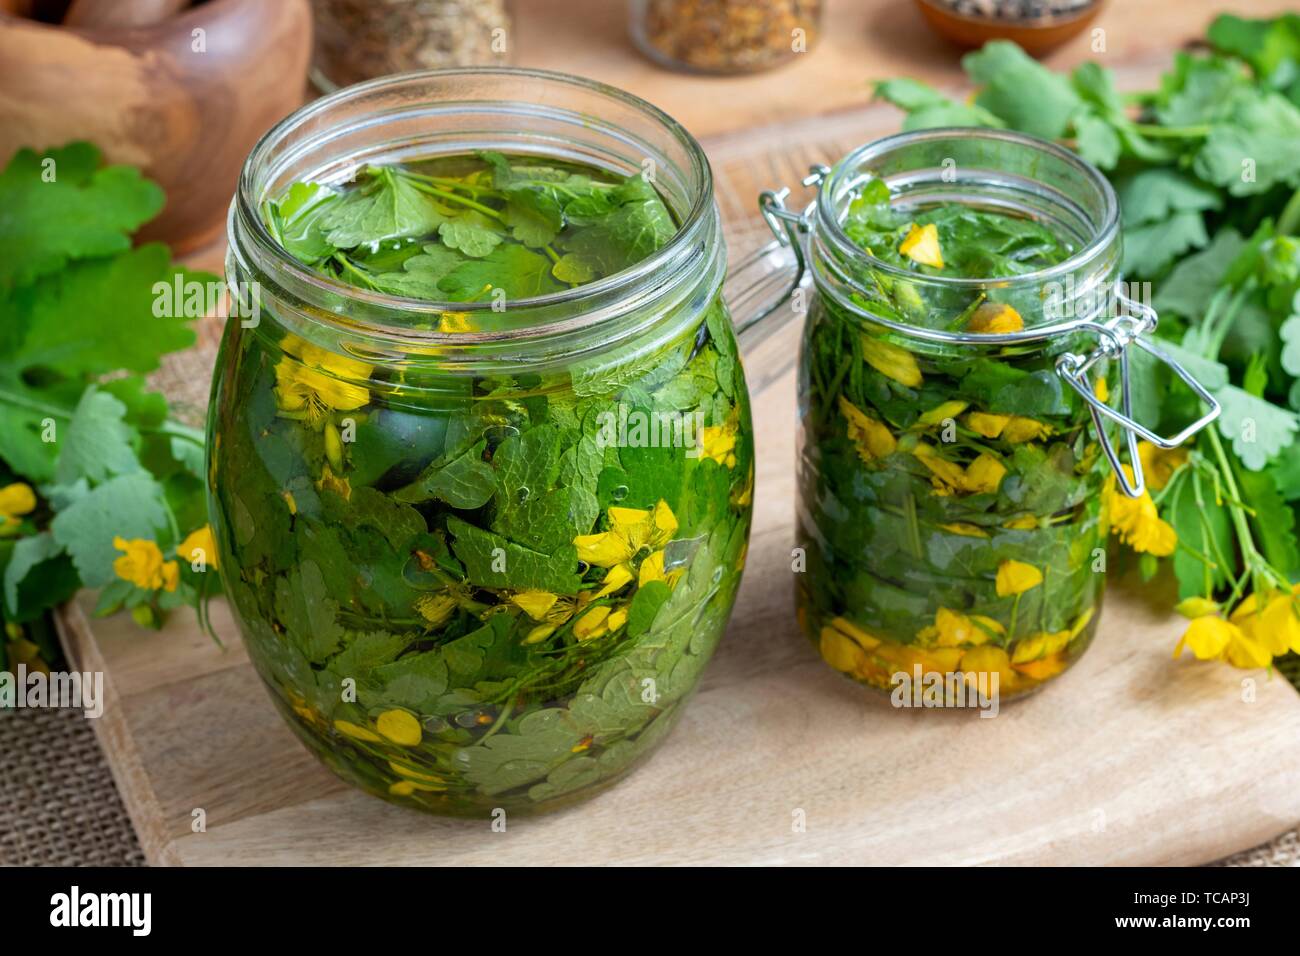 Preparation of greater celandine alcohol tincture and infused oil. Stock Photo